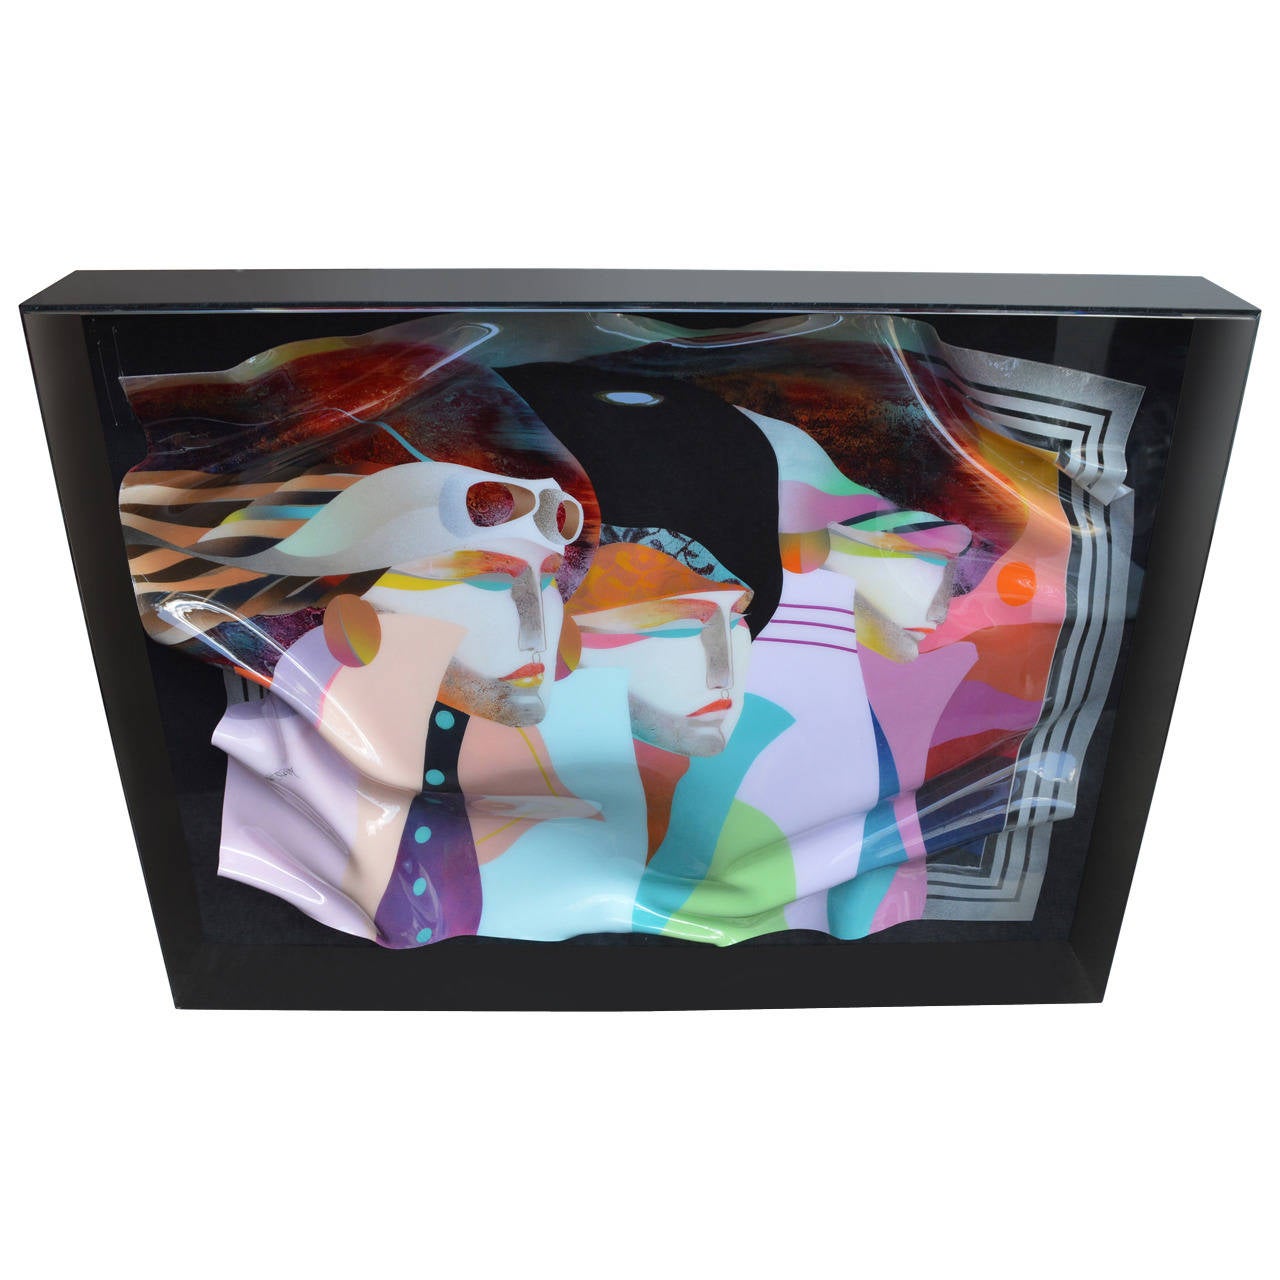 Classic work of reverse painted art glass of three ladies signed and dated by artist Ned Moulton, 1987. Encased in Lucite shadow box.